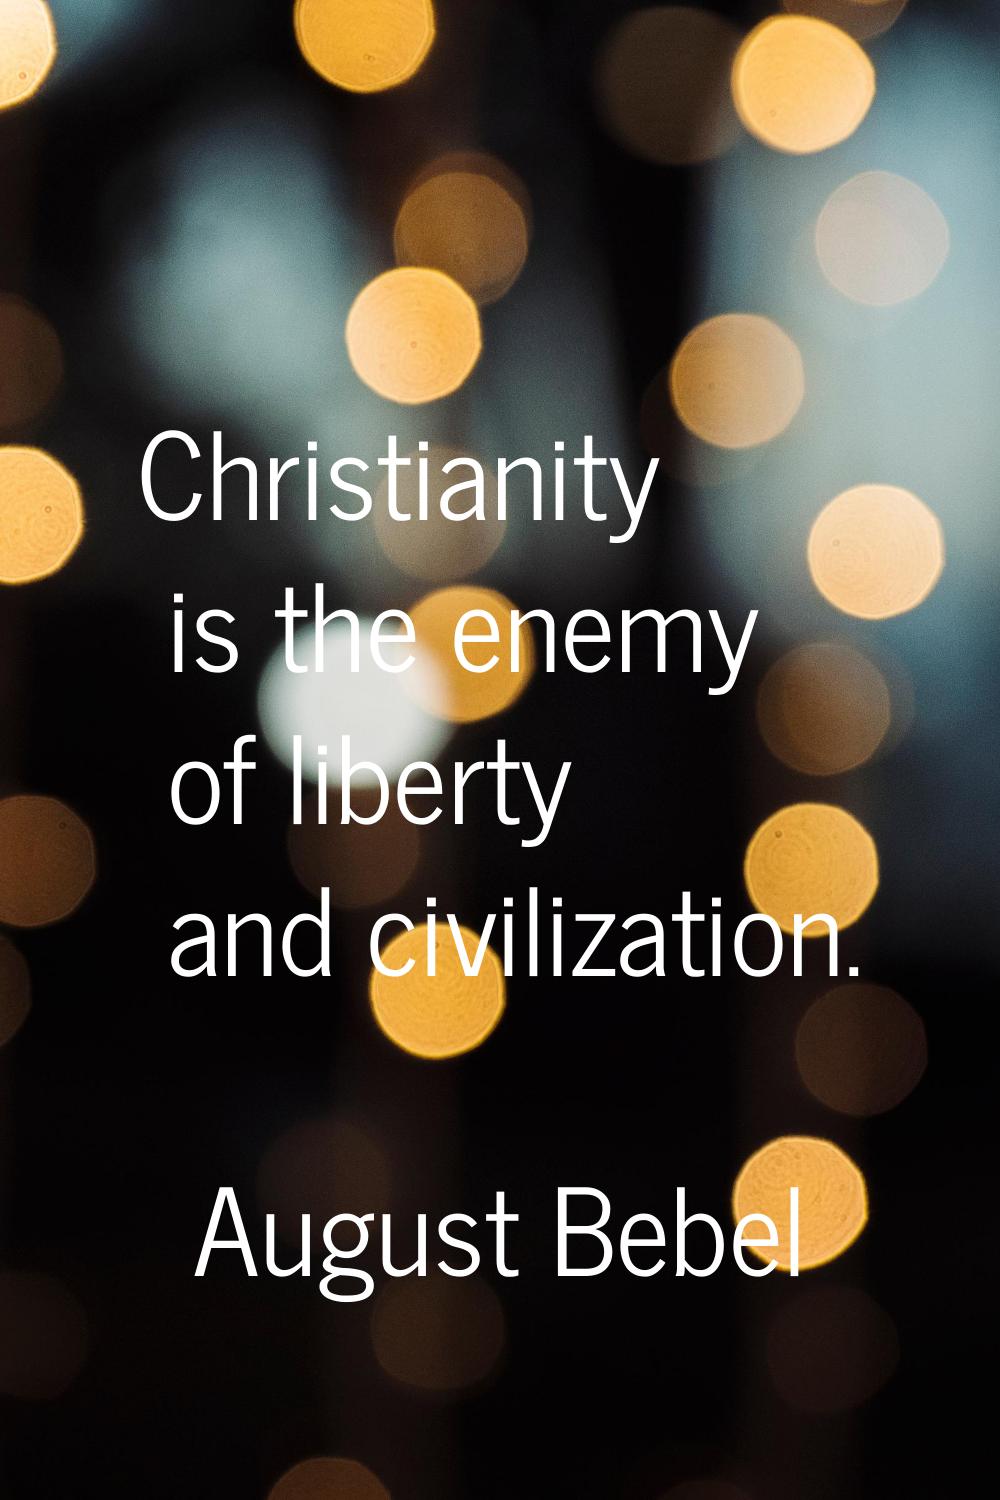 Christianity is the enemy of liberty and civilization.